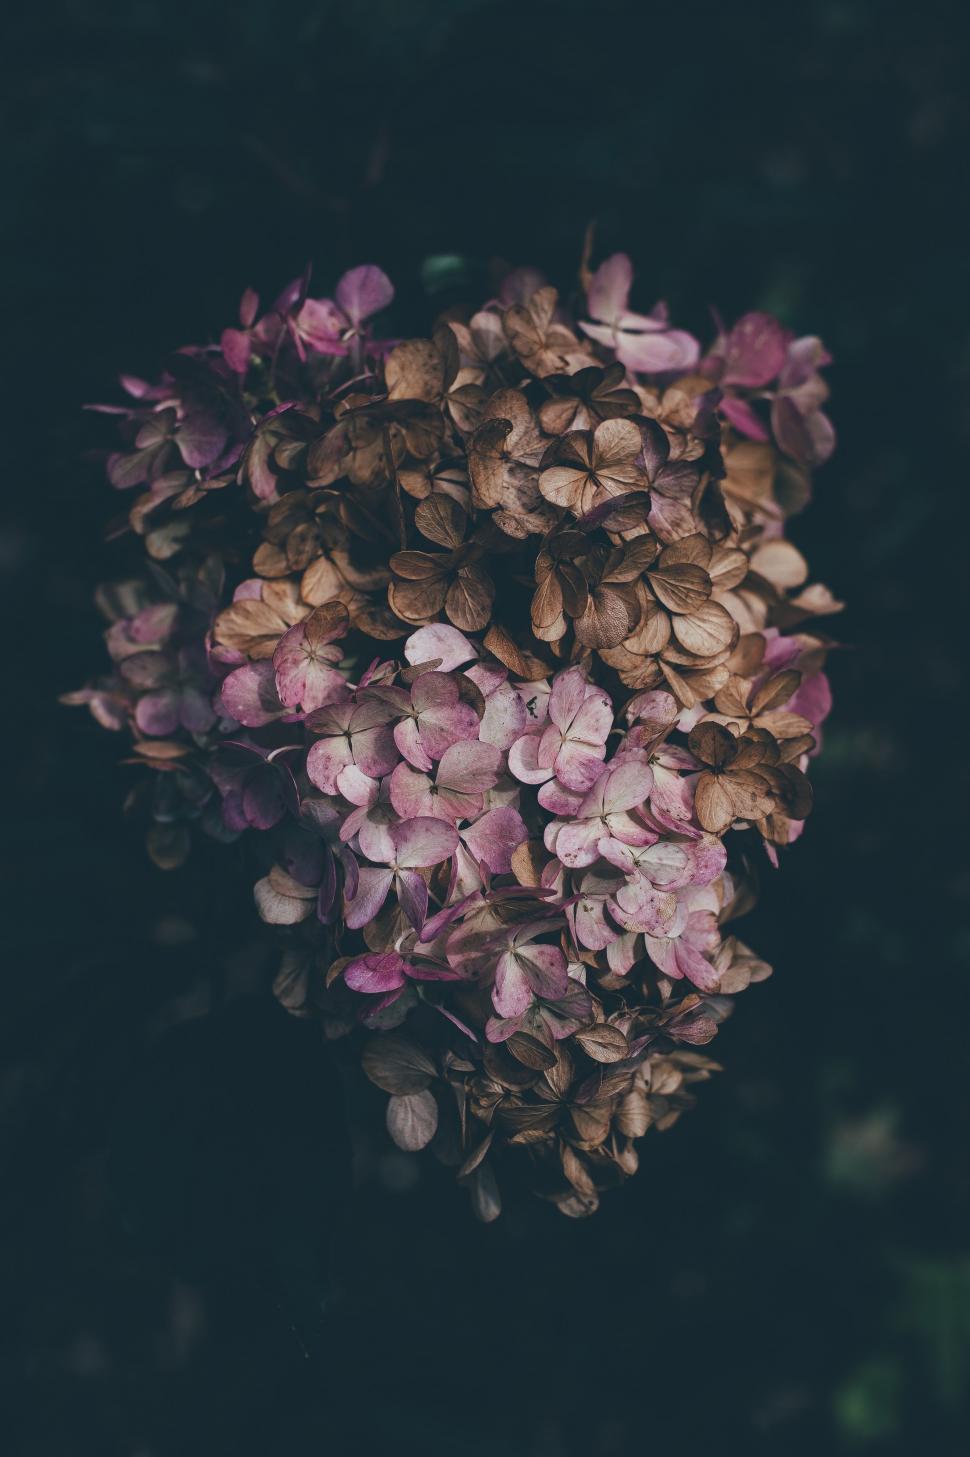 Free Image of Cluster of Purple Flowers on Black Background 